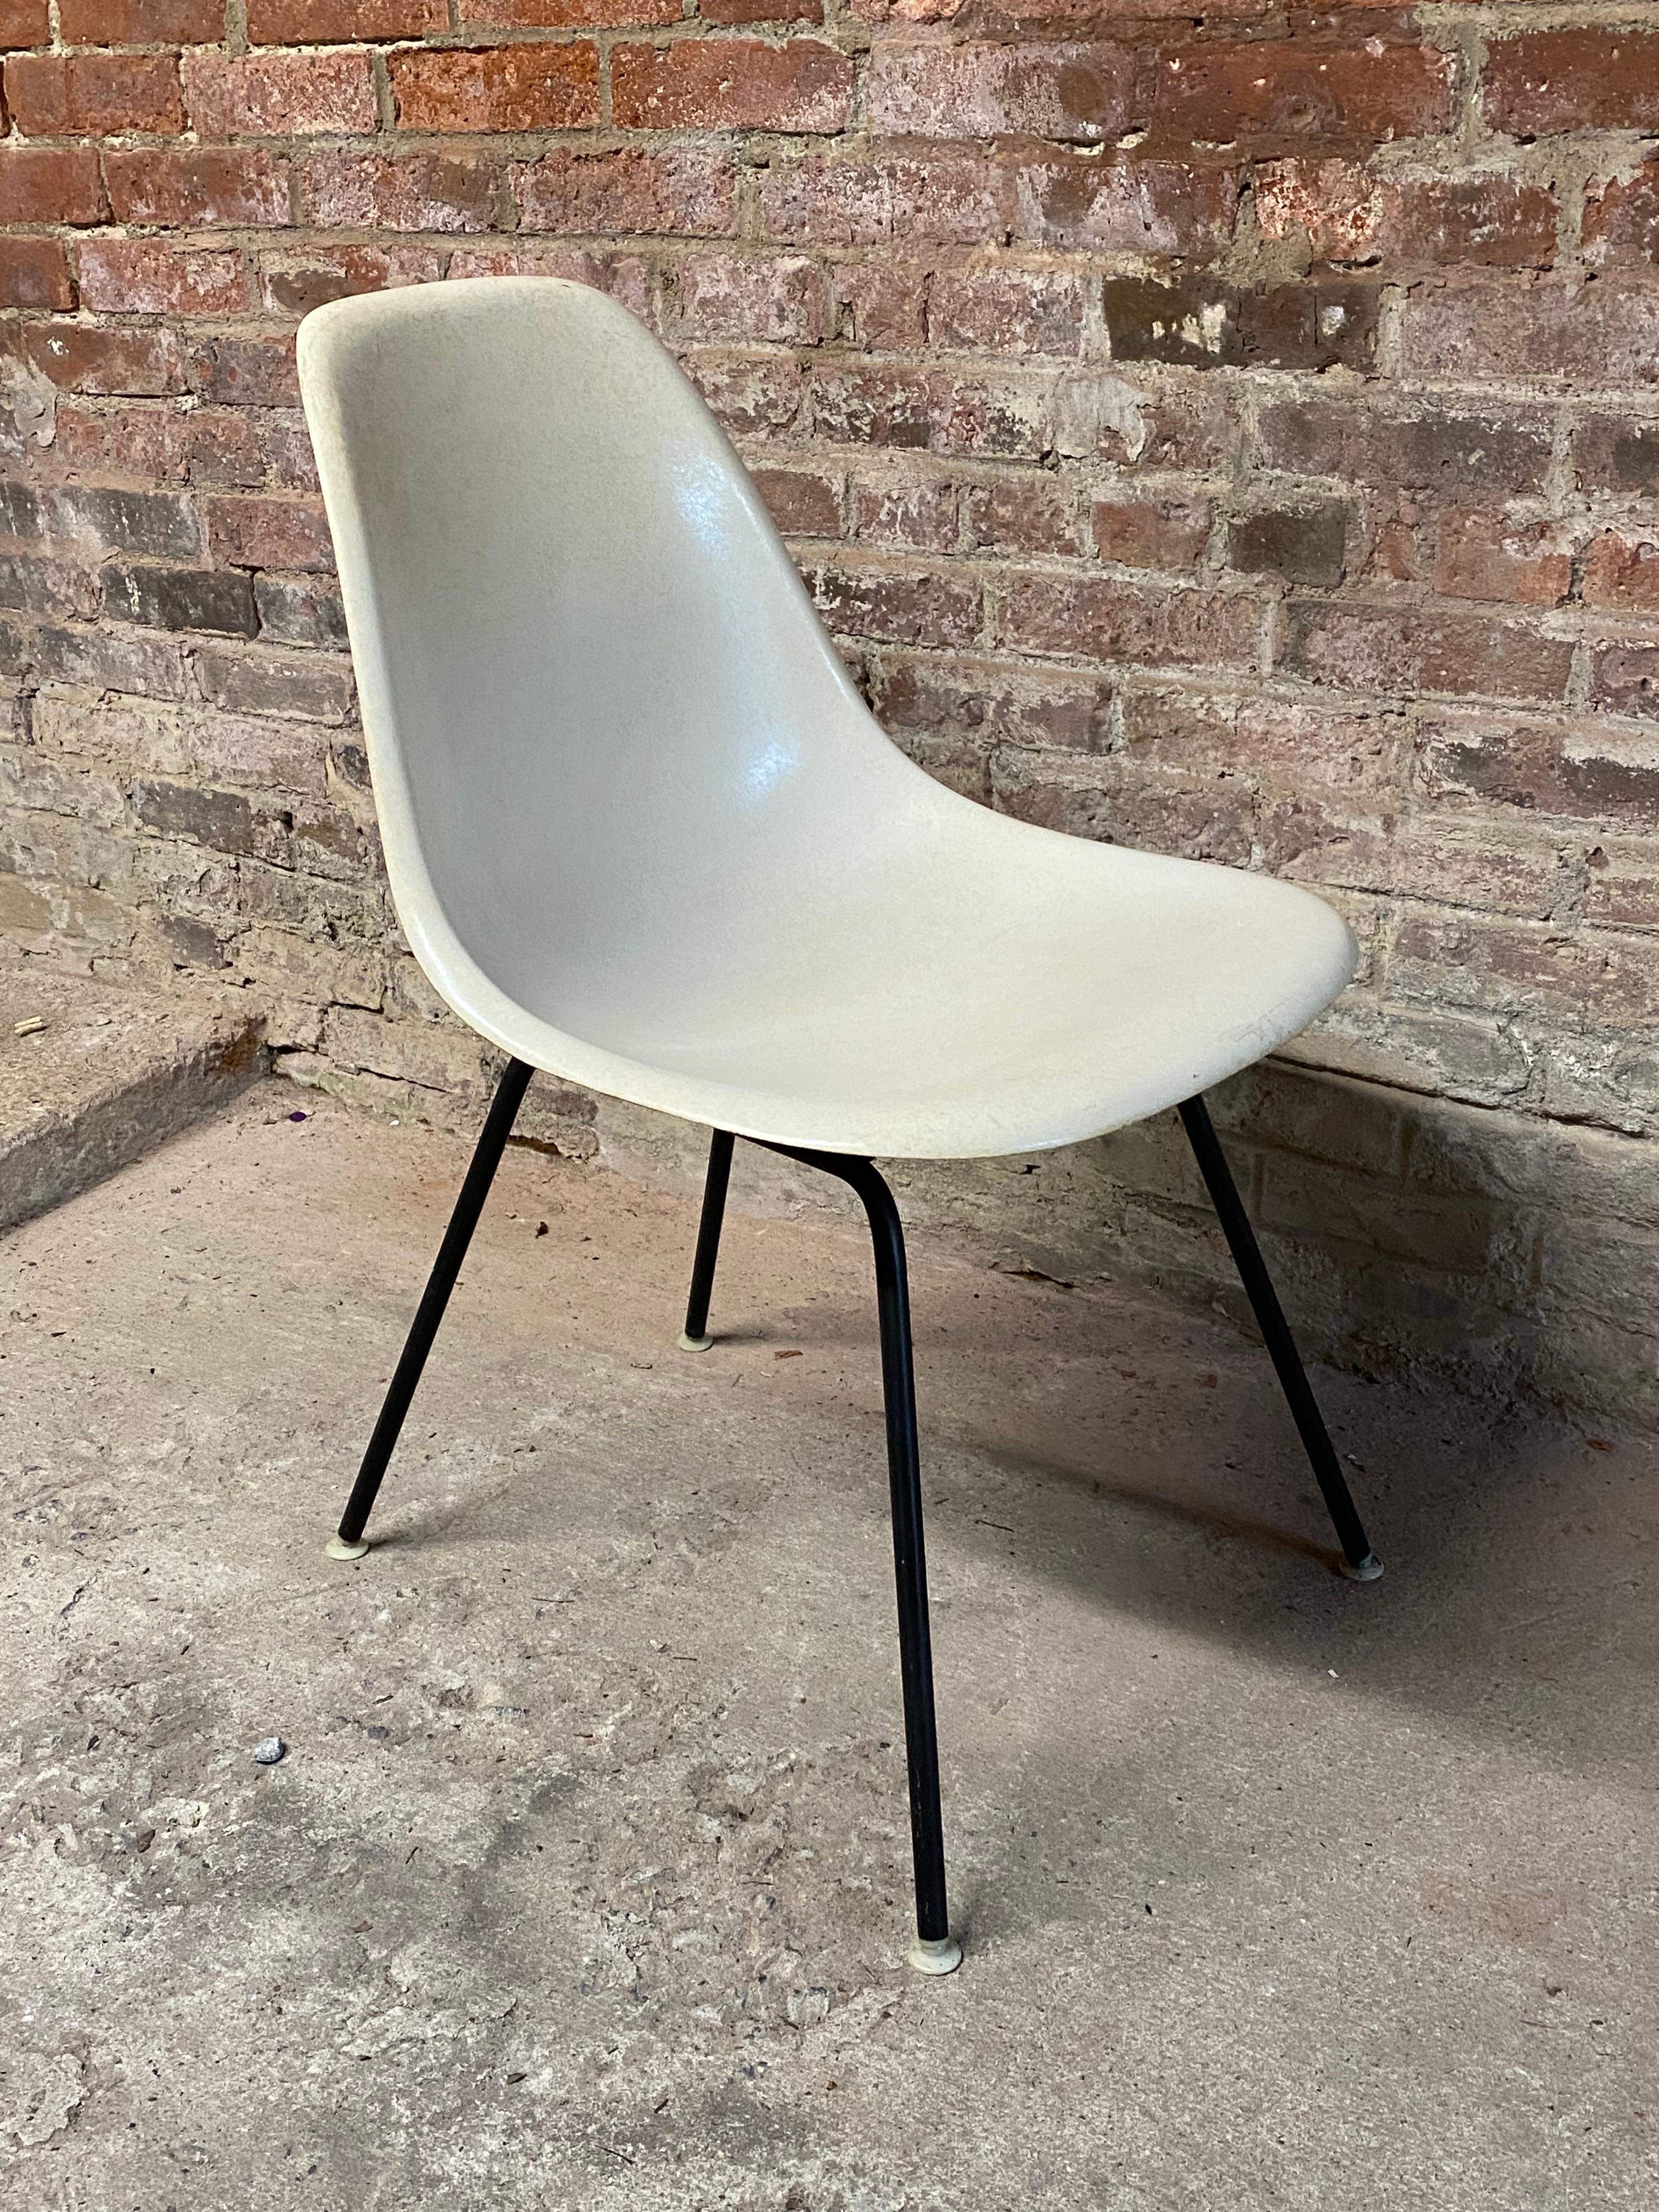 LamoreStore Eames Style Armchair with Molded Plastic Shell Indoor Outdoor Decor Mid-Century Stylish Vintage 